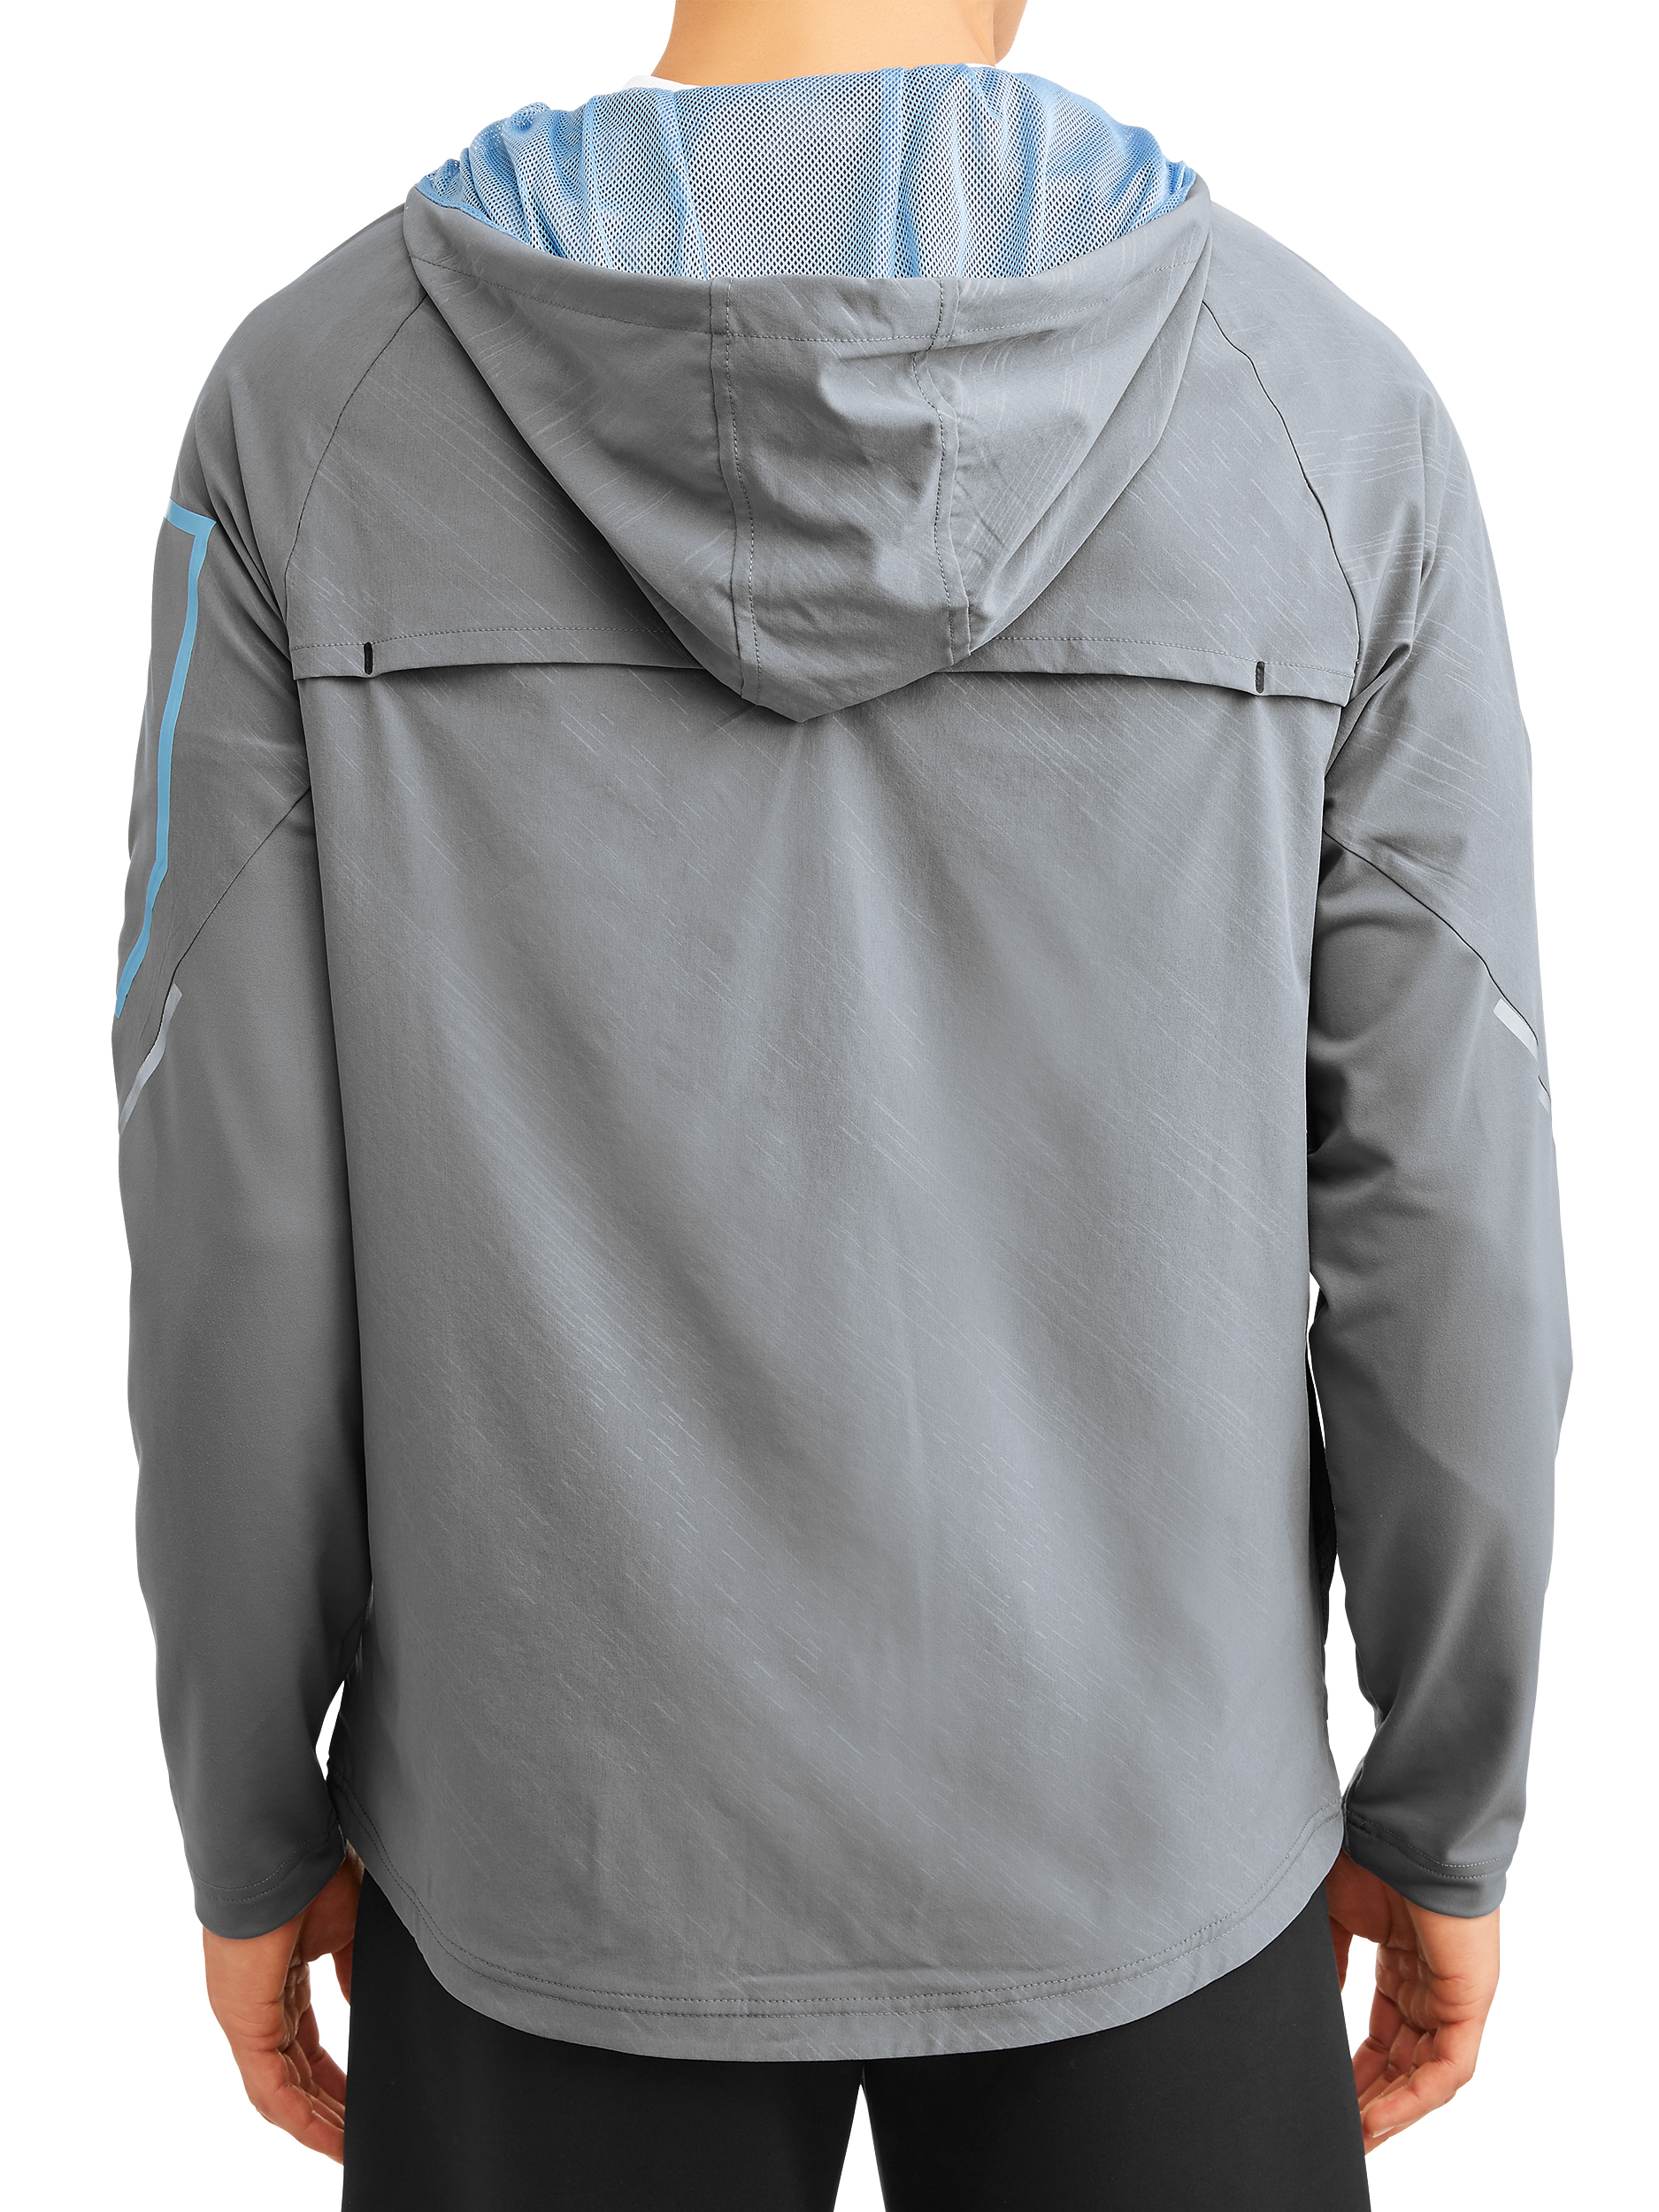 Russell Exclusive Men's Core Performance Jacket - image 2 of 4